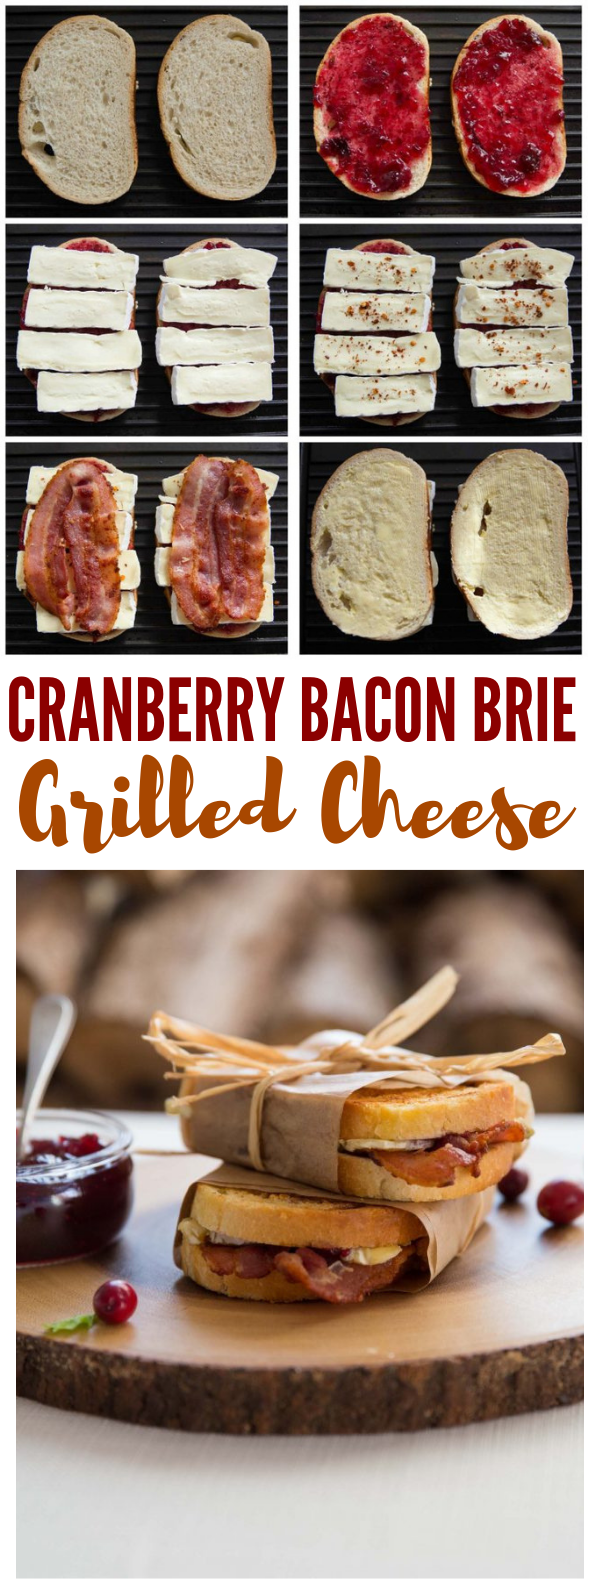 Cranberry Bacon Brie Grilled Cheese #dinner #food